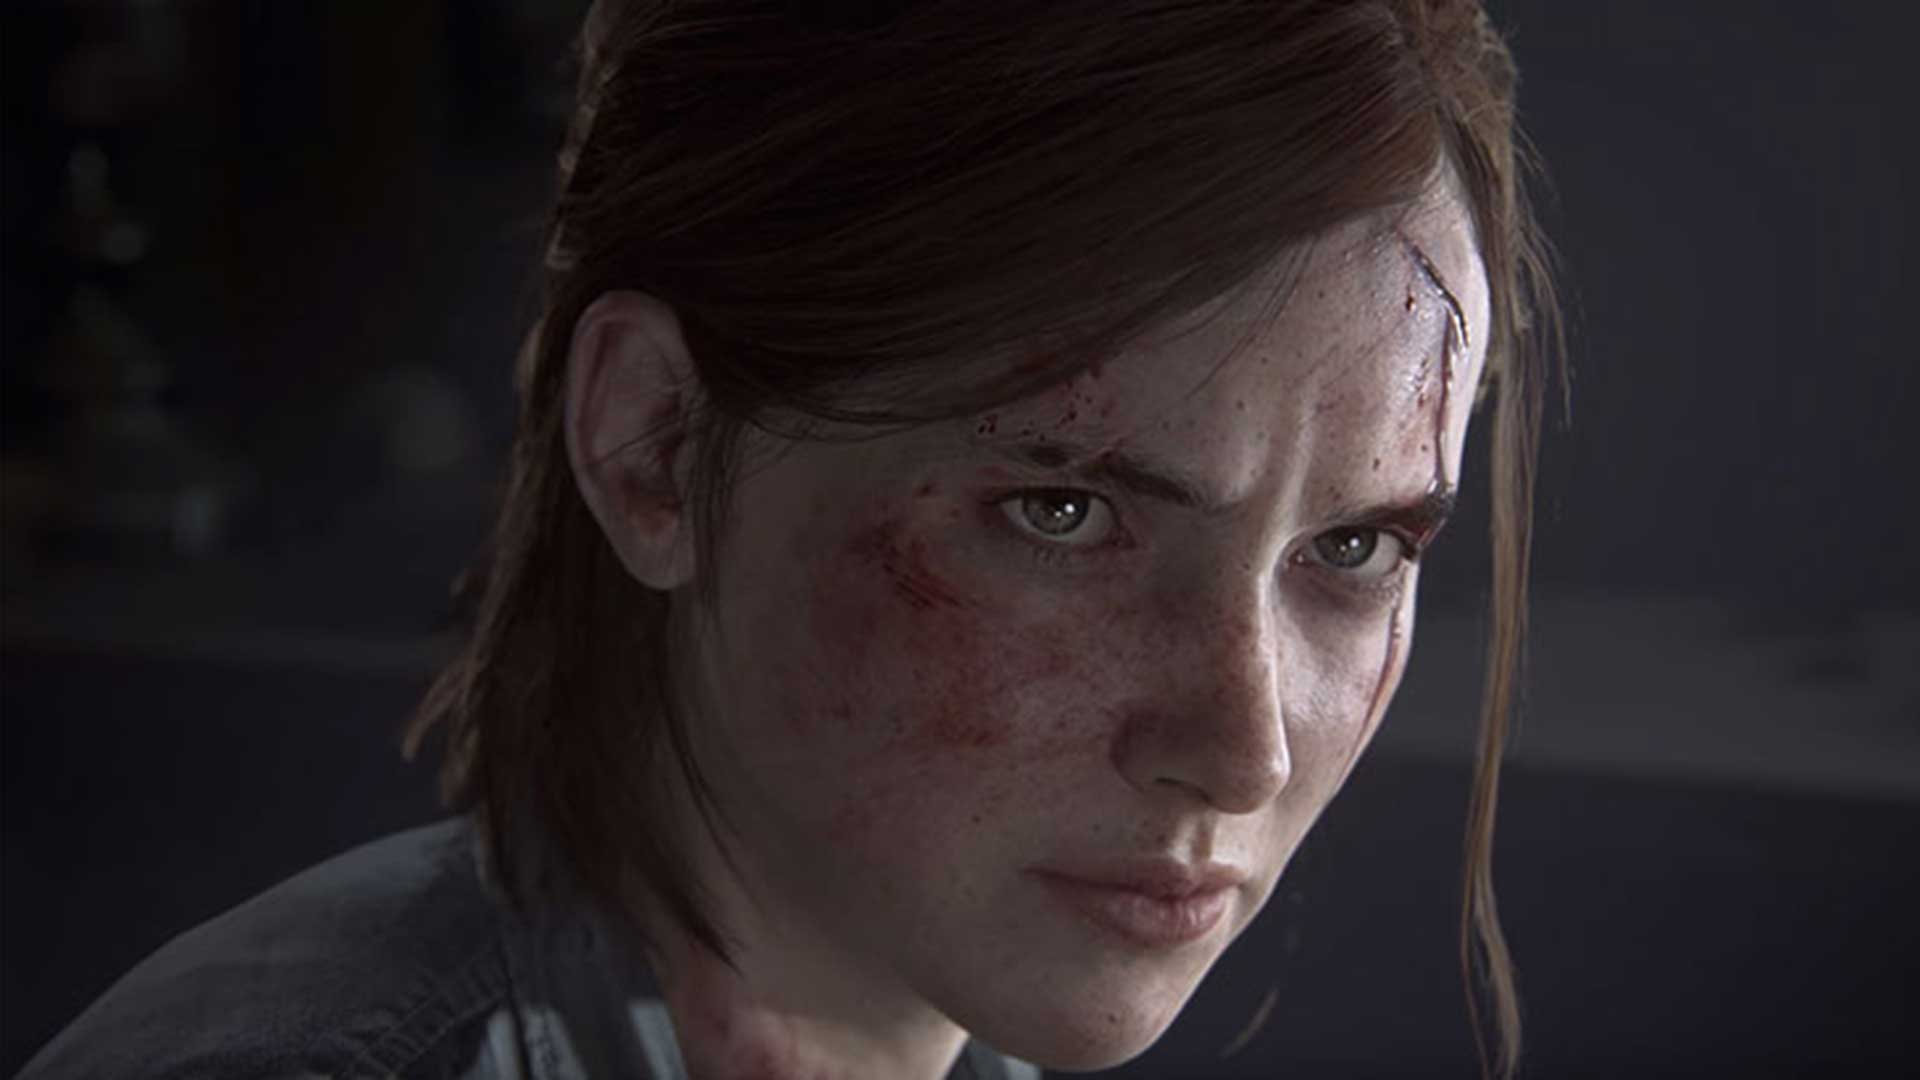 New version of The Last of Us Part 2 may